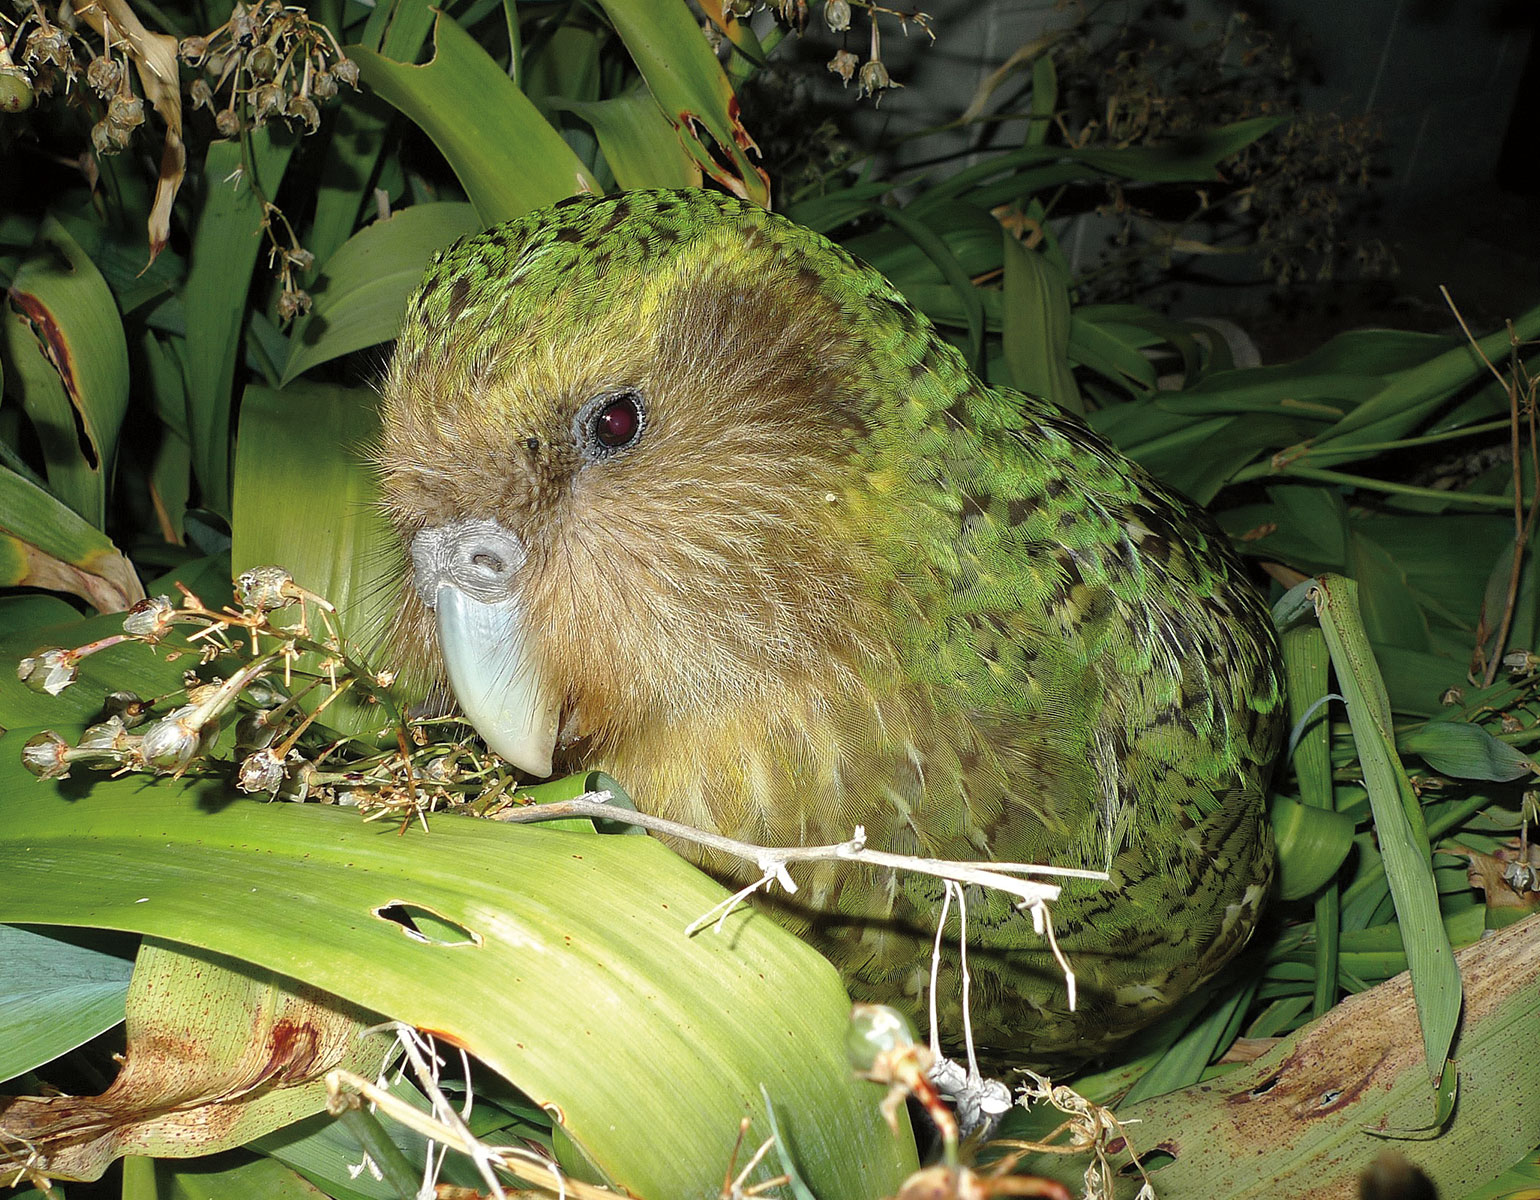 Ancient and endangered, the kakapo is one of 25 species with a brand-new reference genome.